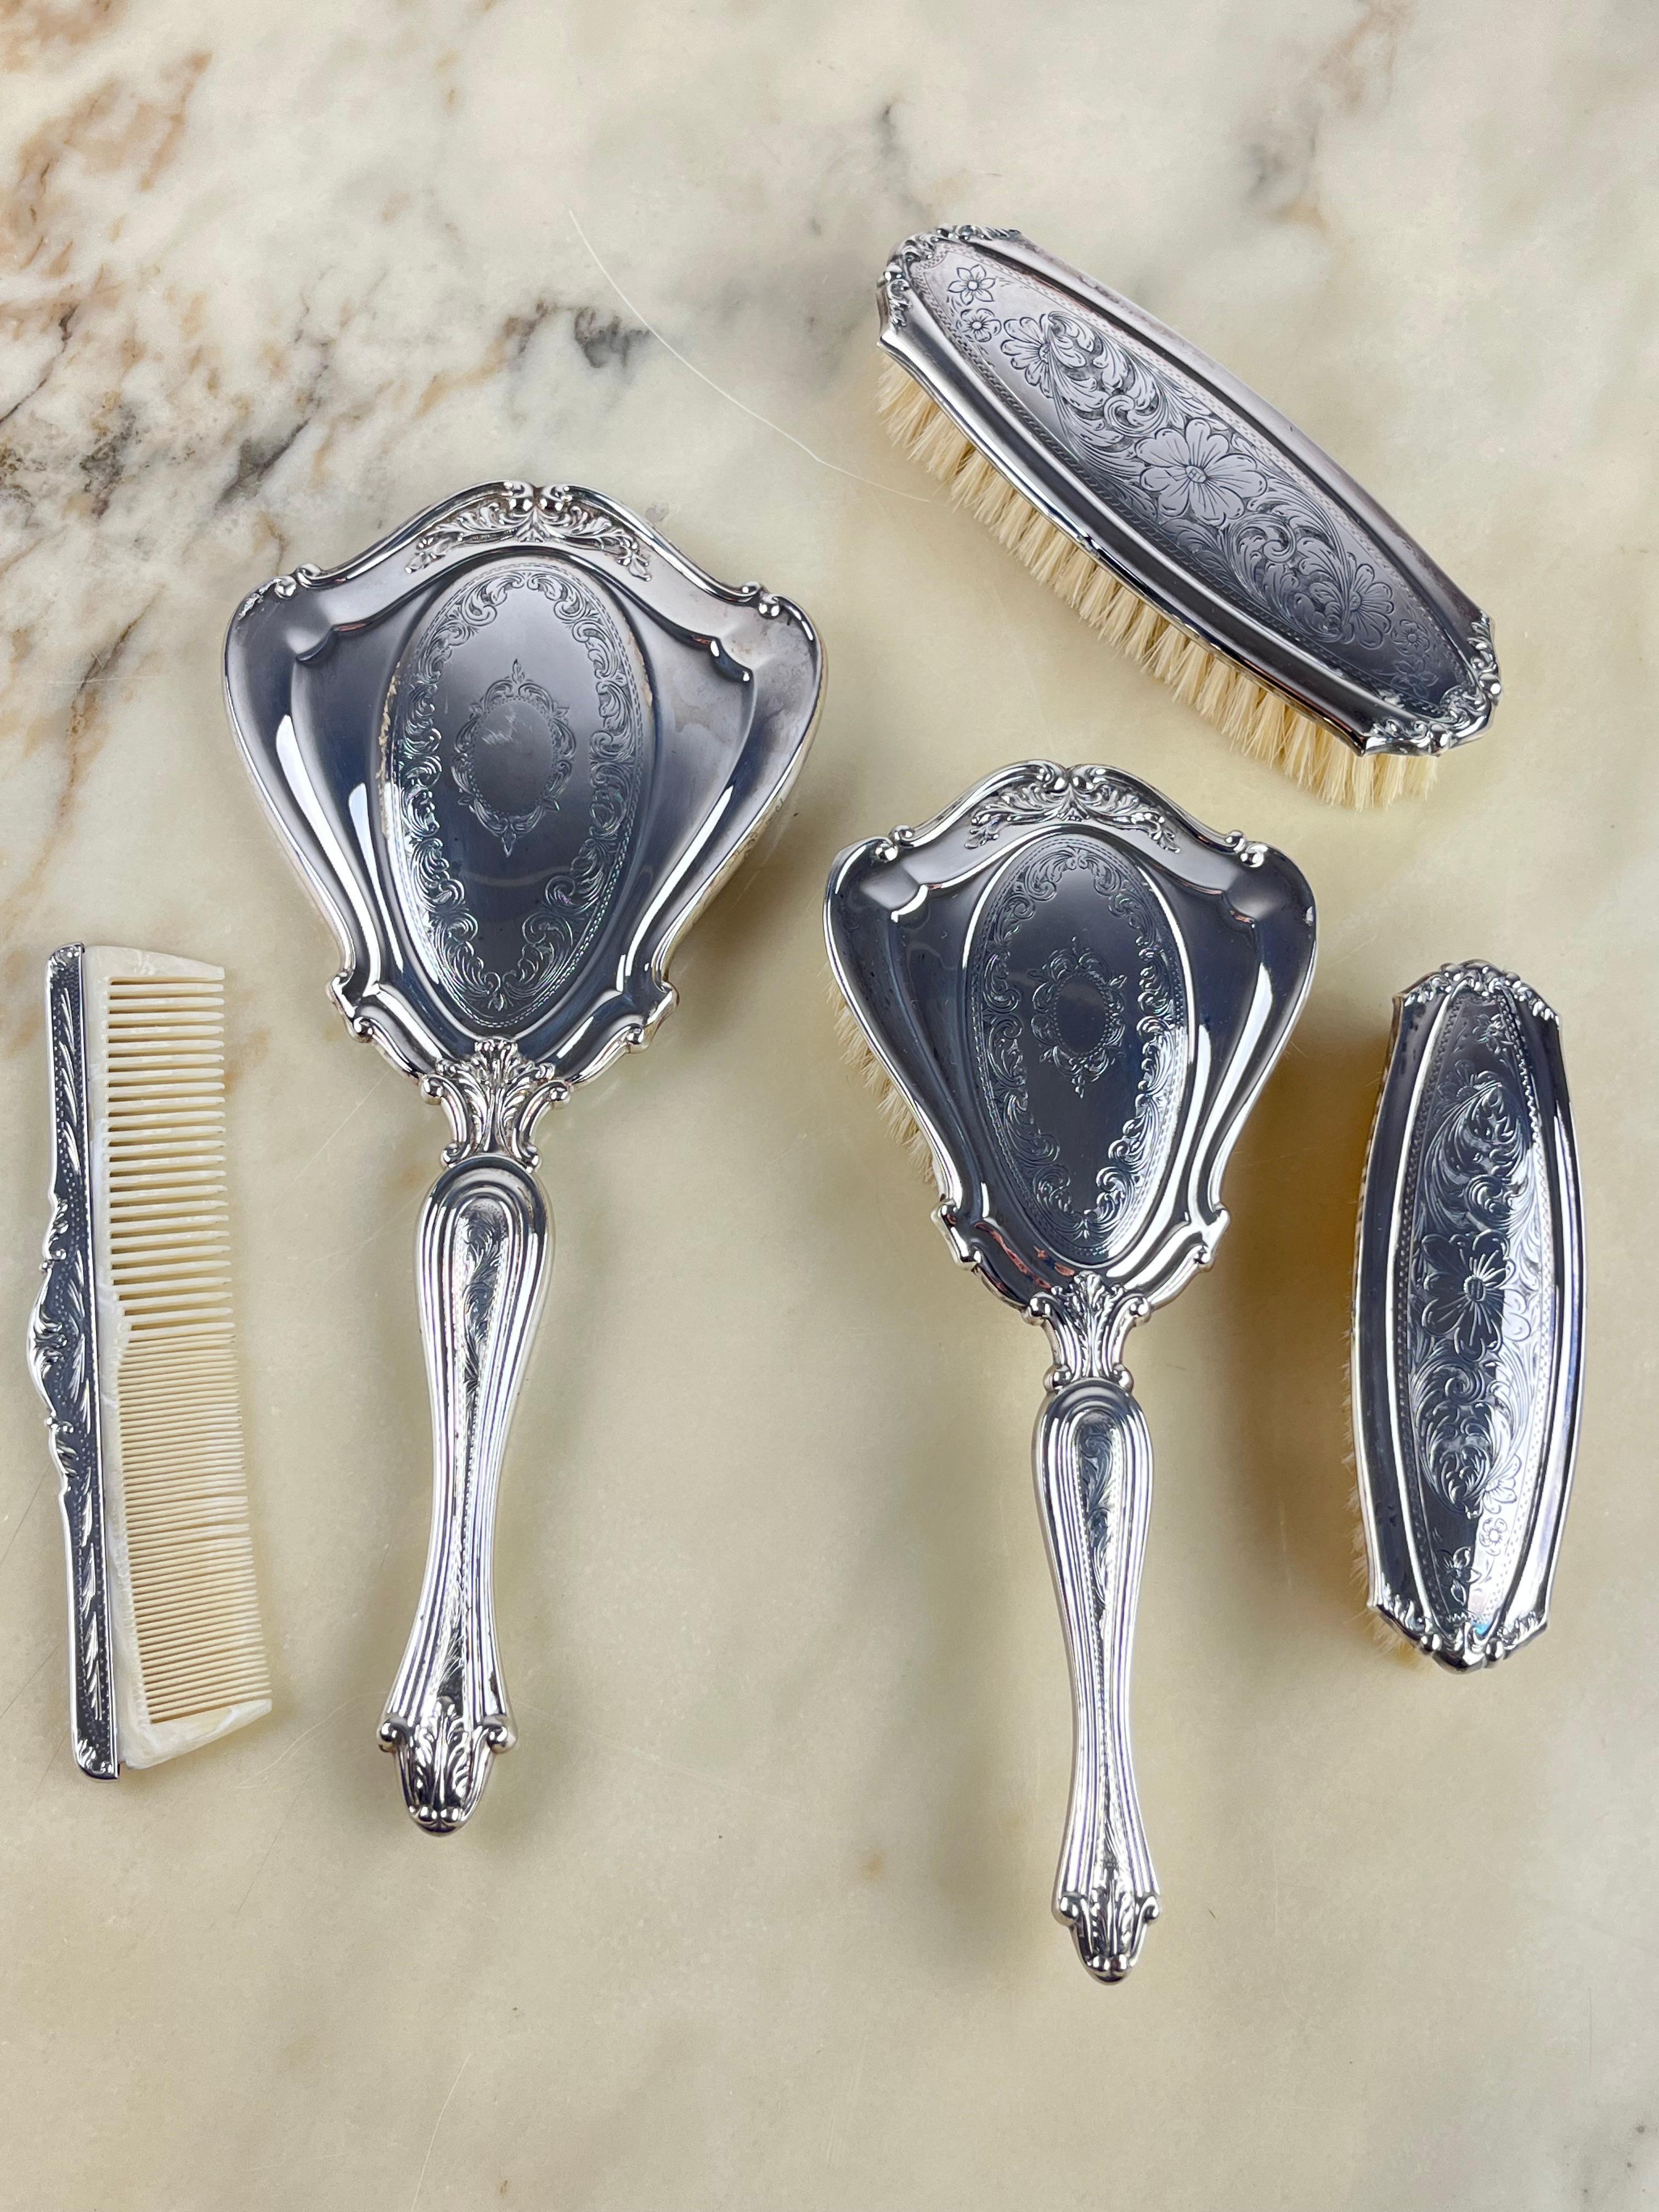 5-Piece Toilet Set in 800 Silver, Italy, 1960s, never used For Sale 5